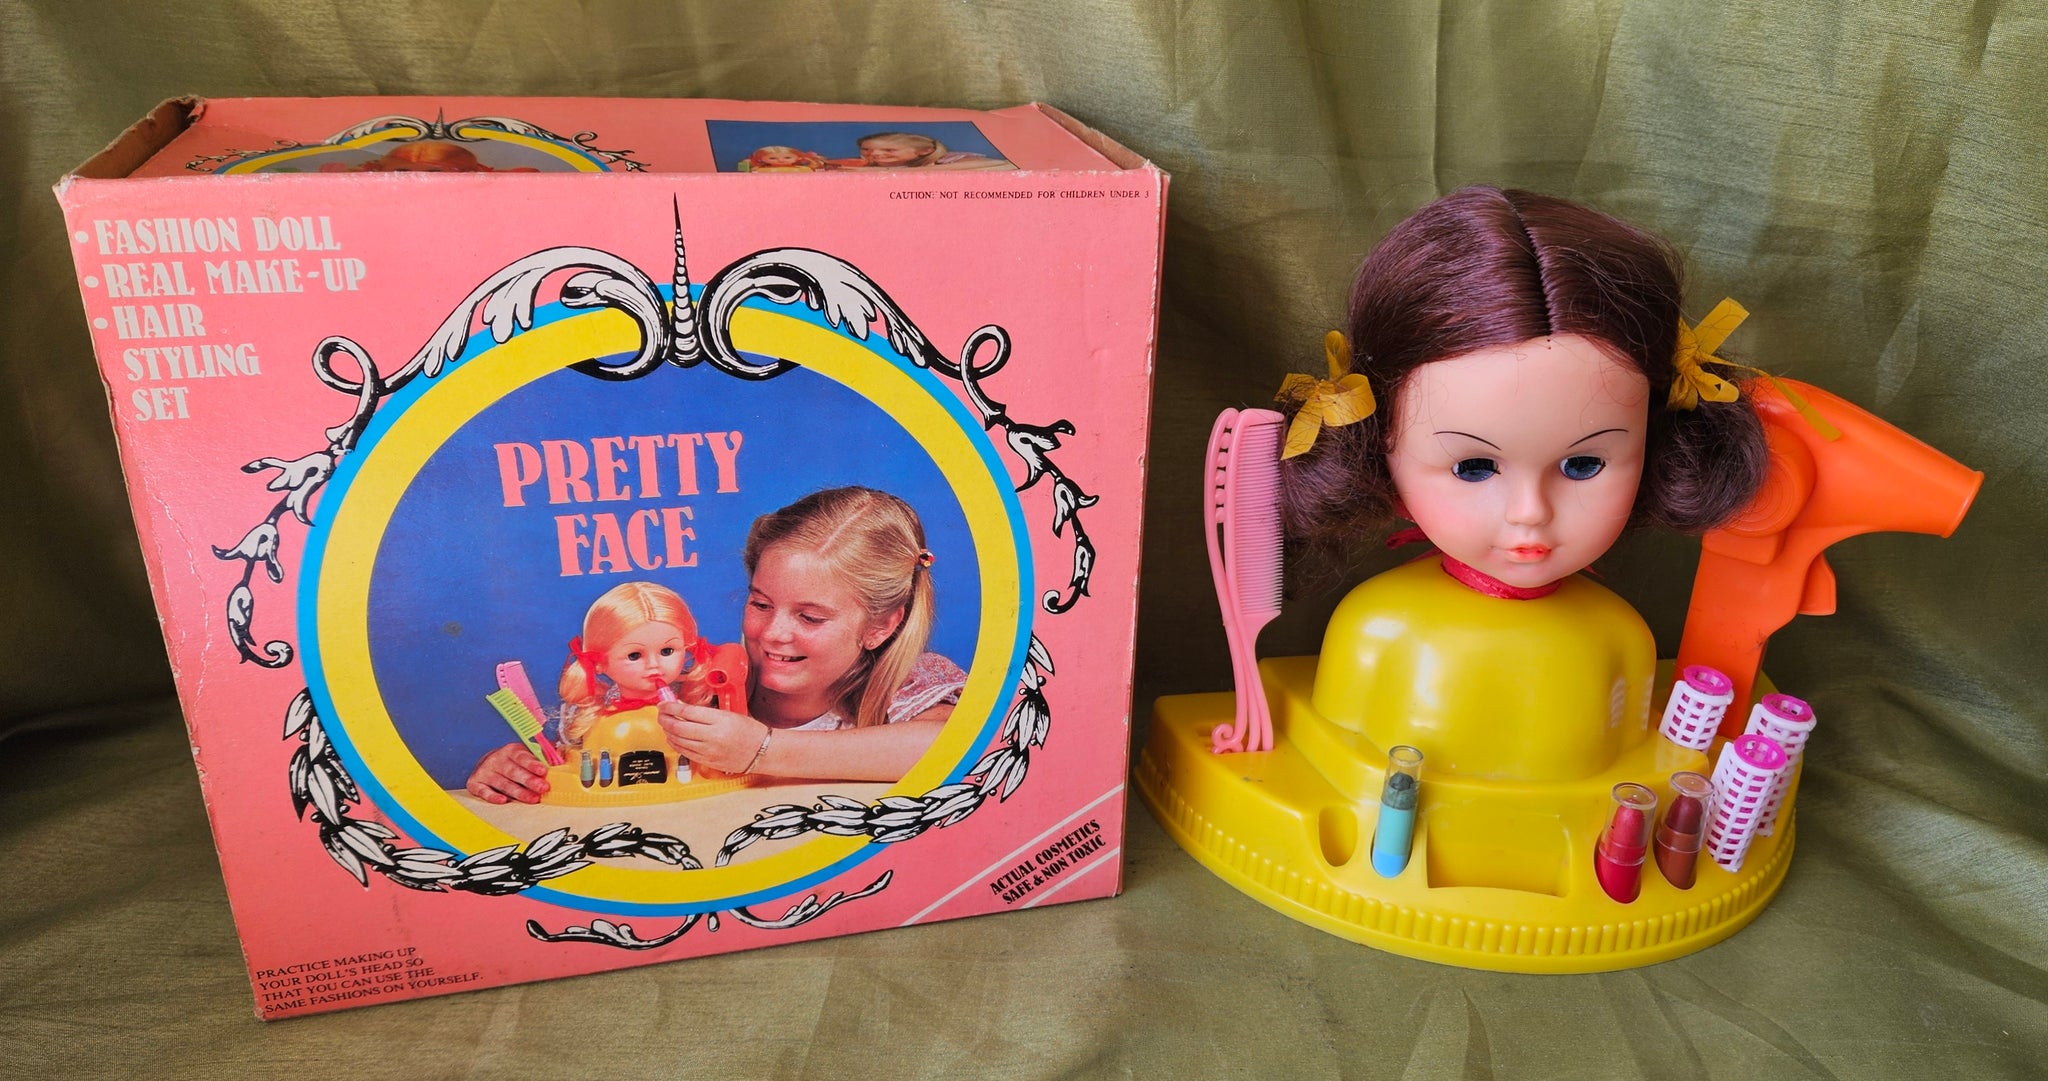 PRETTY FACE Vintage Fashion Doll Real Make-up Syling Set